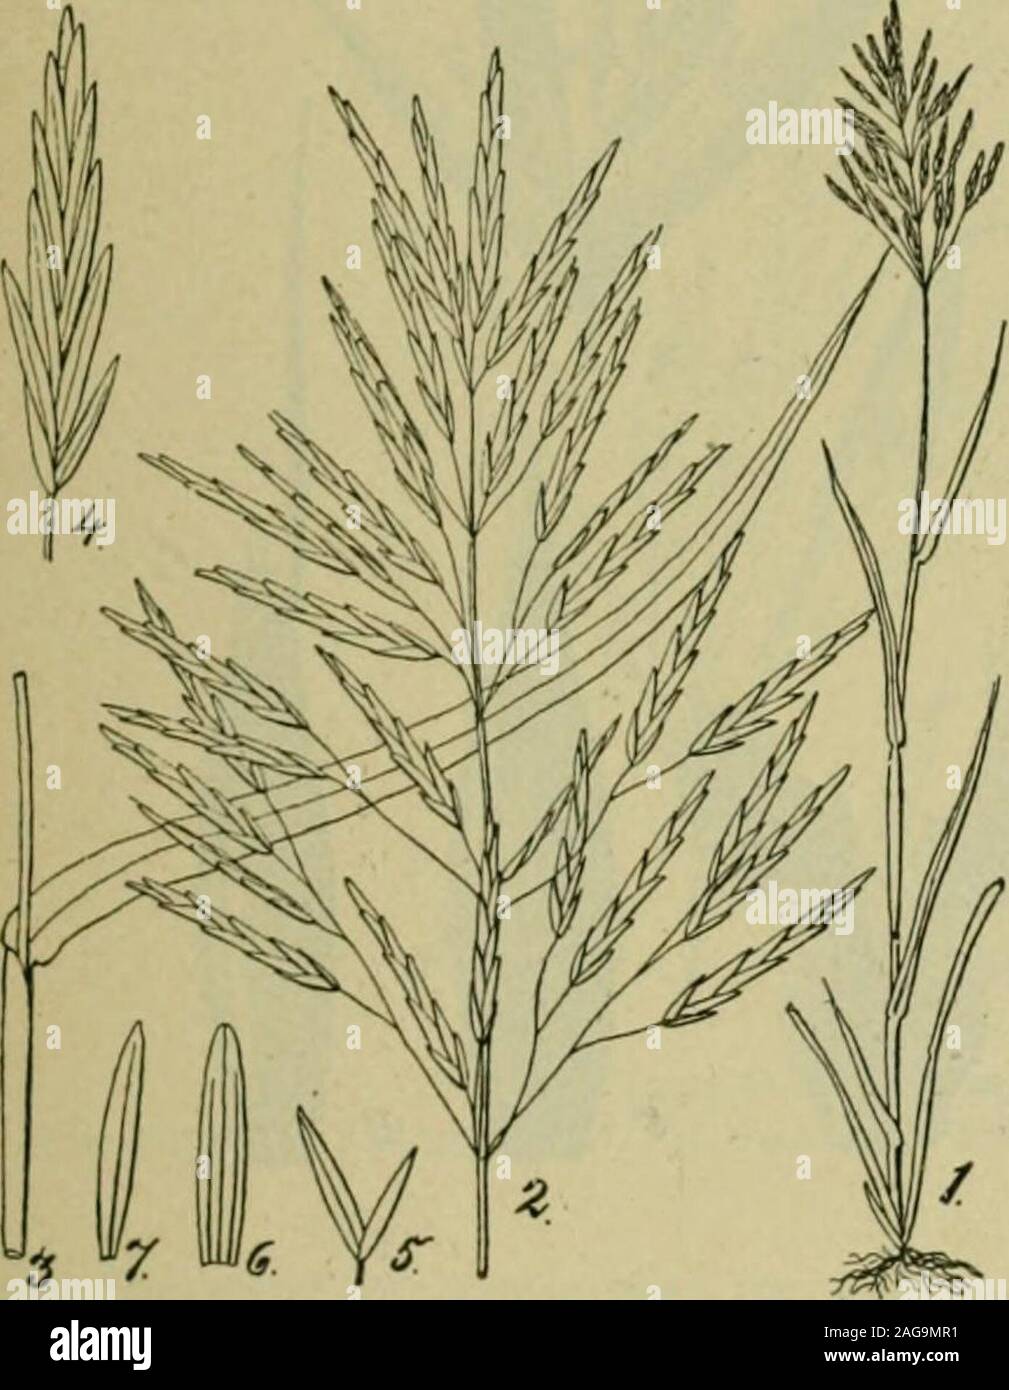 . Grasses and forage plants, by J.B. Killebrew. se soils and so may be welladapted to the Cumberlandmountain region. It grows,however, more vigorouslyupon good soils. It is difificultto exterminate, but not somuch so as Bermuda or John-son grass. It possibly maysupply a want on the gravelly soils of East Tennessee and of the siliceoussoils of the highland rim. Its introduction, however, is attended withsome risk. It remains green the greater part of the winter and is desira-ble as a winter pasture. It is said to be low in its nutritive elements. Abushel of seed weighs 14 pounds and sells for $ Stock Photo